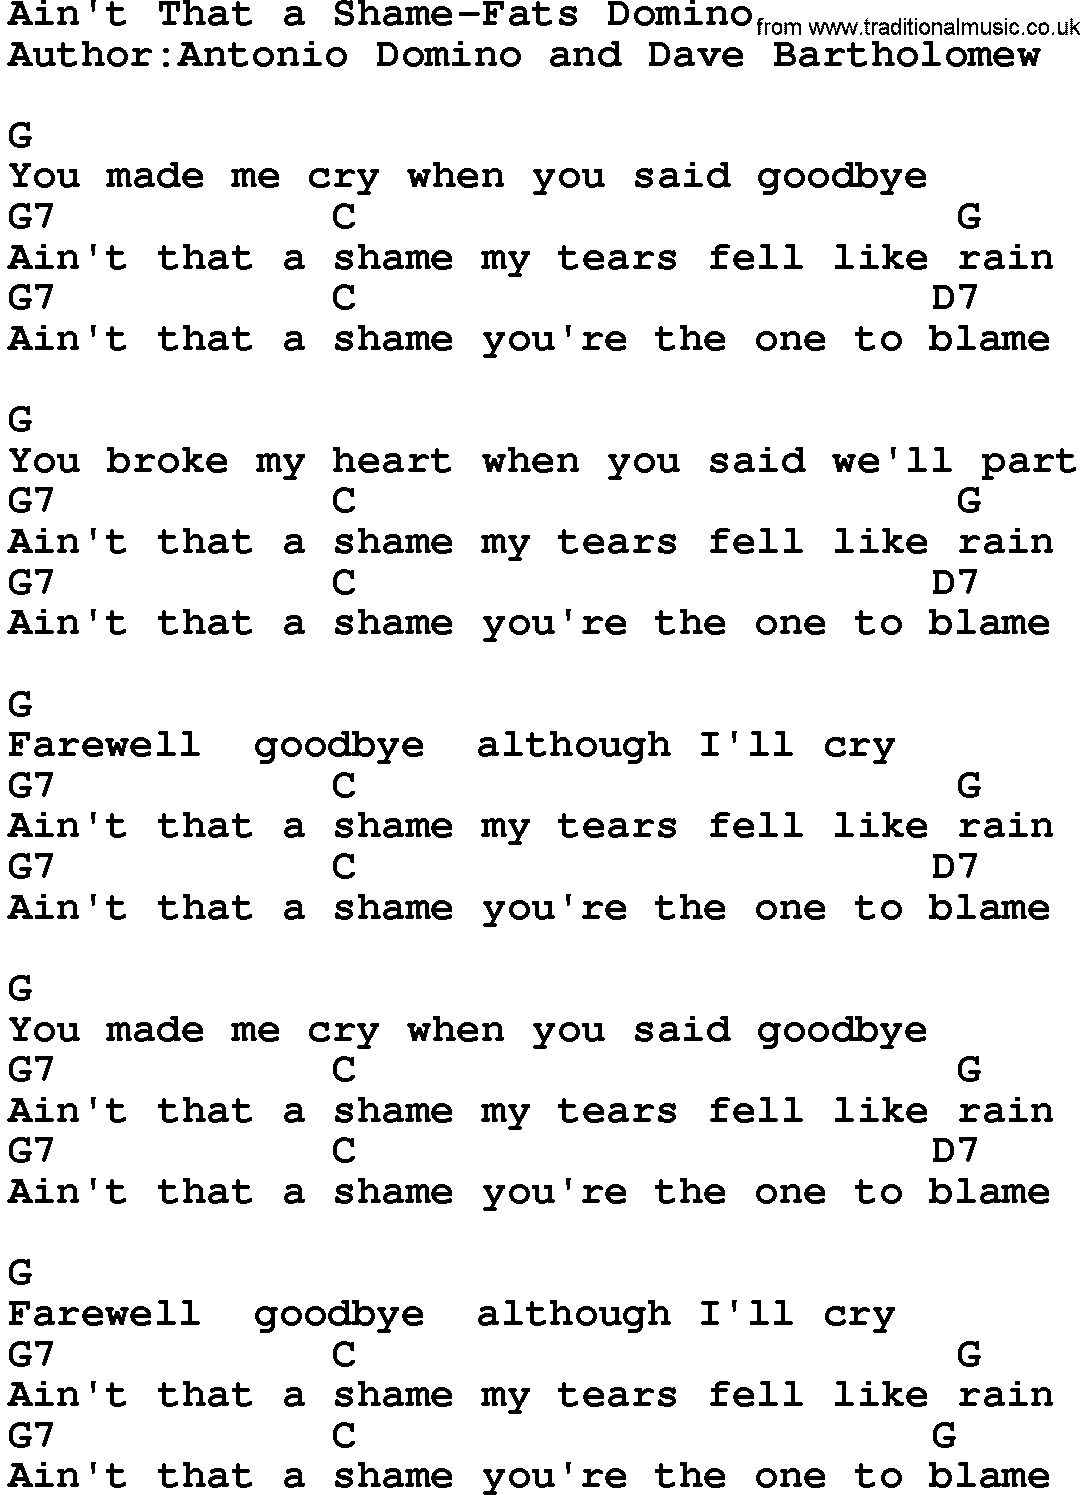 Country music song: Ain't That A Shame-Fats Domino lyrics and chords